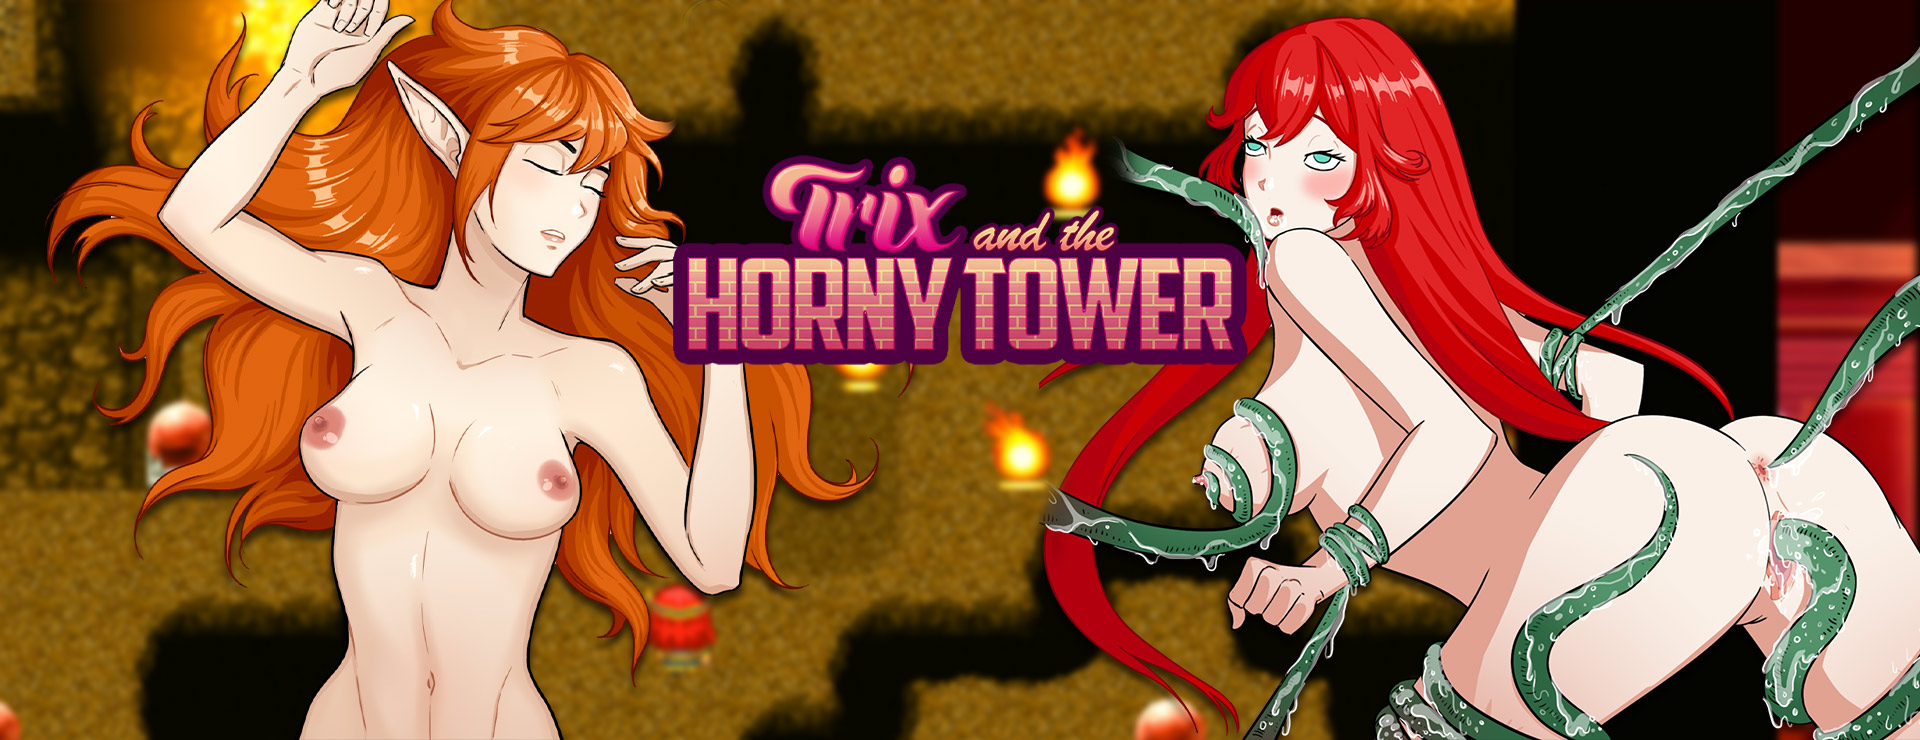 Trix and the Horny Tower - RPG Jeu